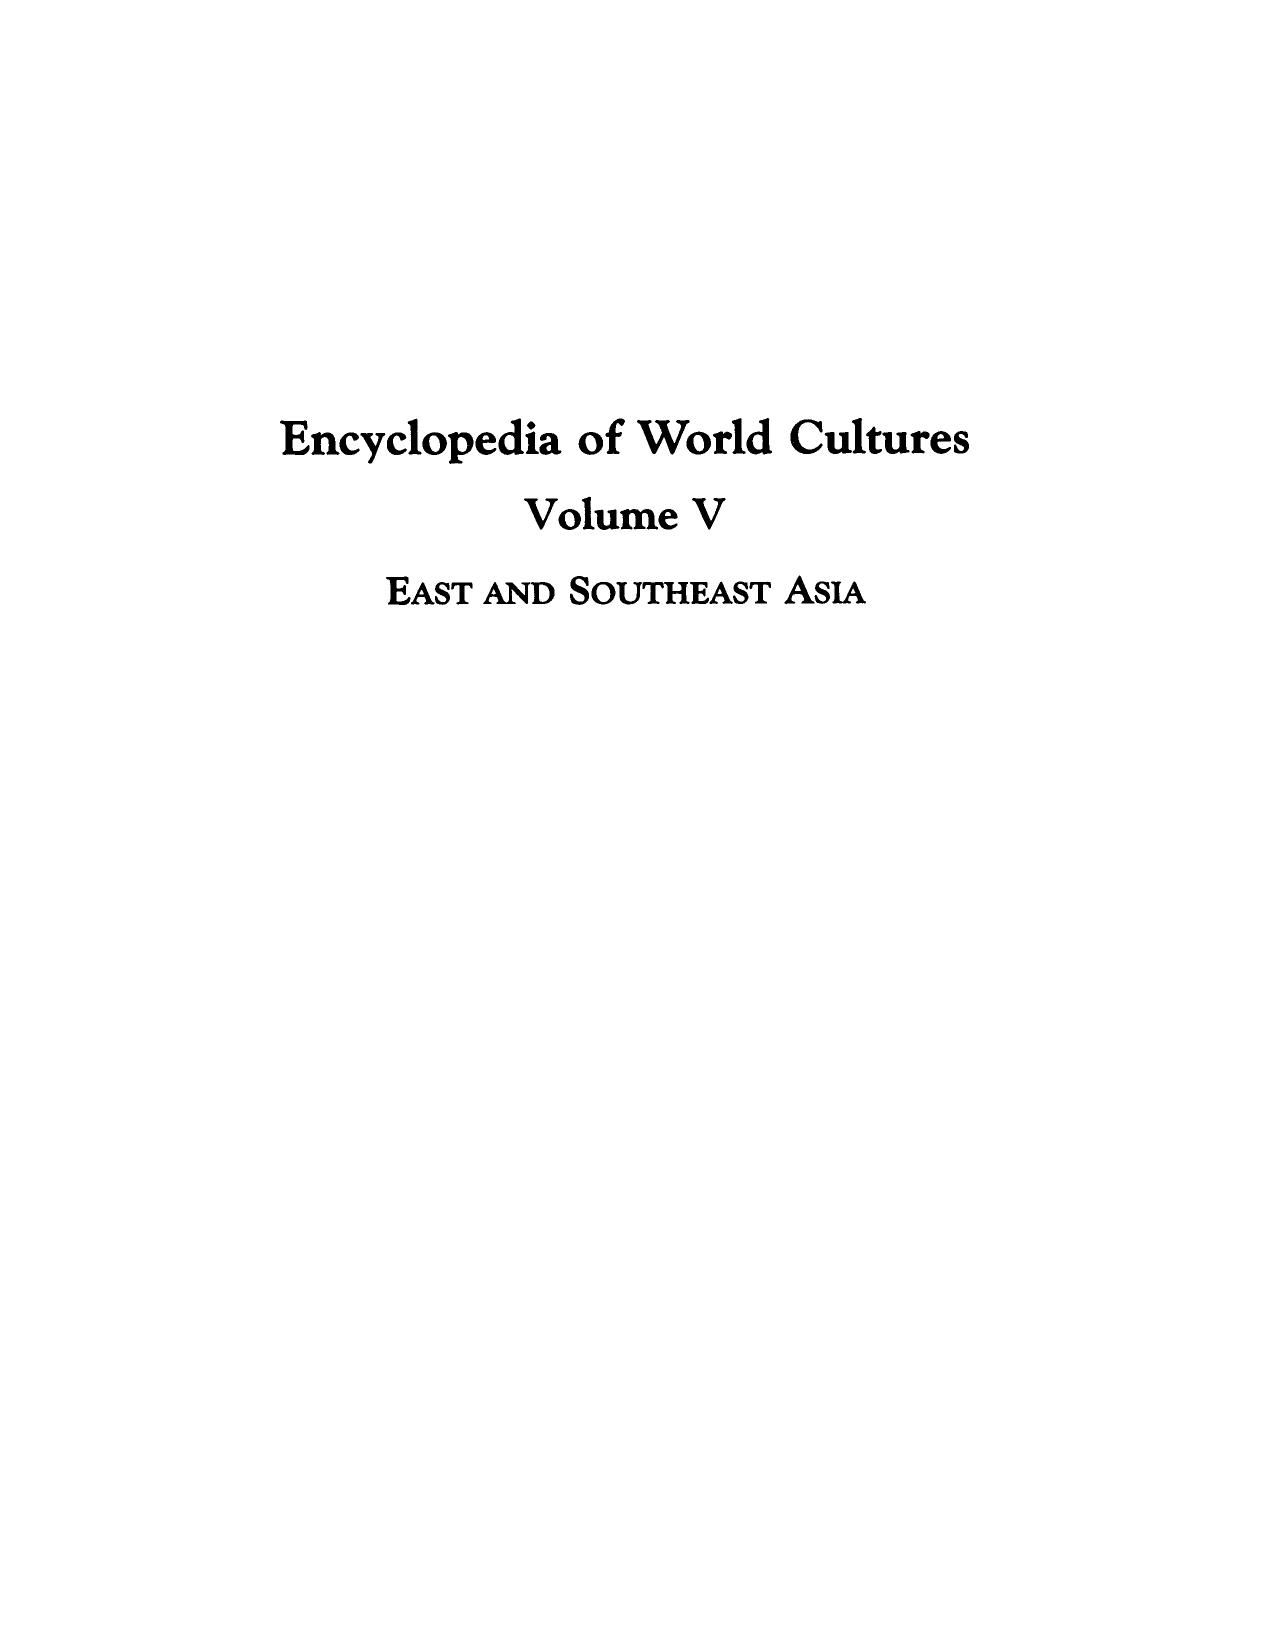 Encyclopedia of World Cultures